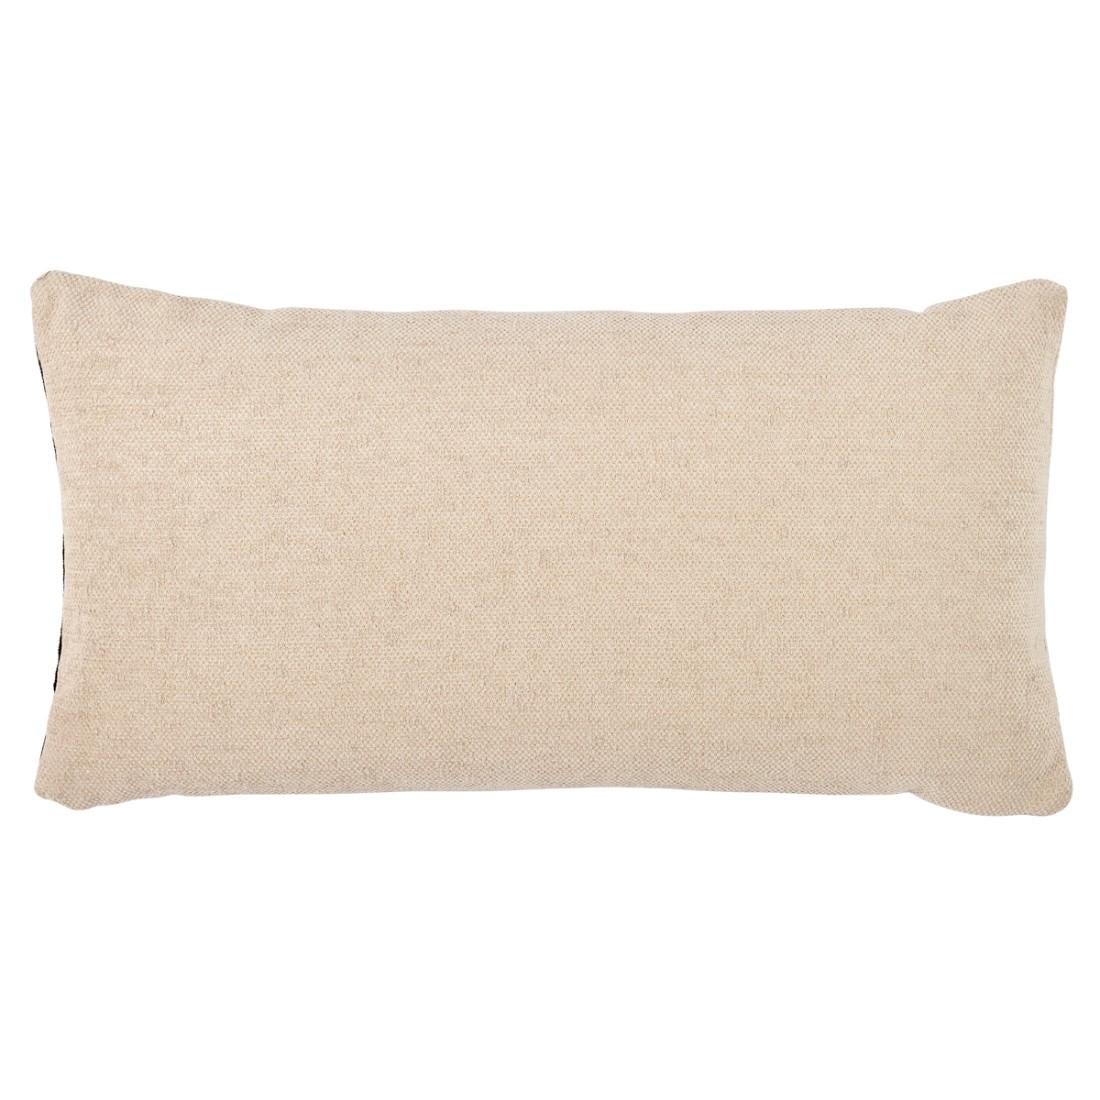 This pillow features Nicholson Tape with a knife edge finish. This versatile tape is crisp yet relaxed. Body of pillow is Artisanal Boucle. Pillow includes a feather/down fill insert and hidden zipper closure.


Content:
64% Cotton, 12% Metallic,